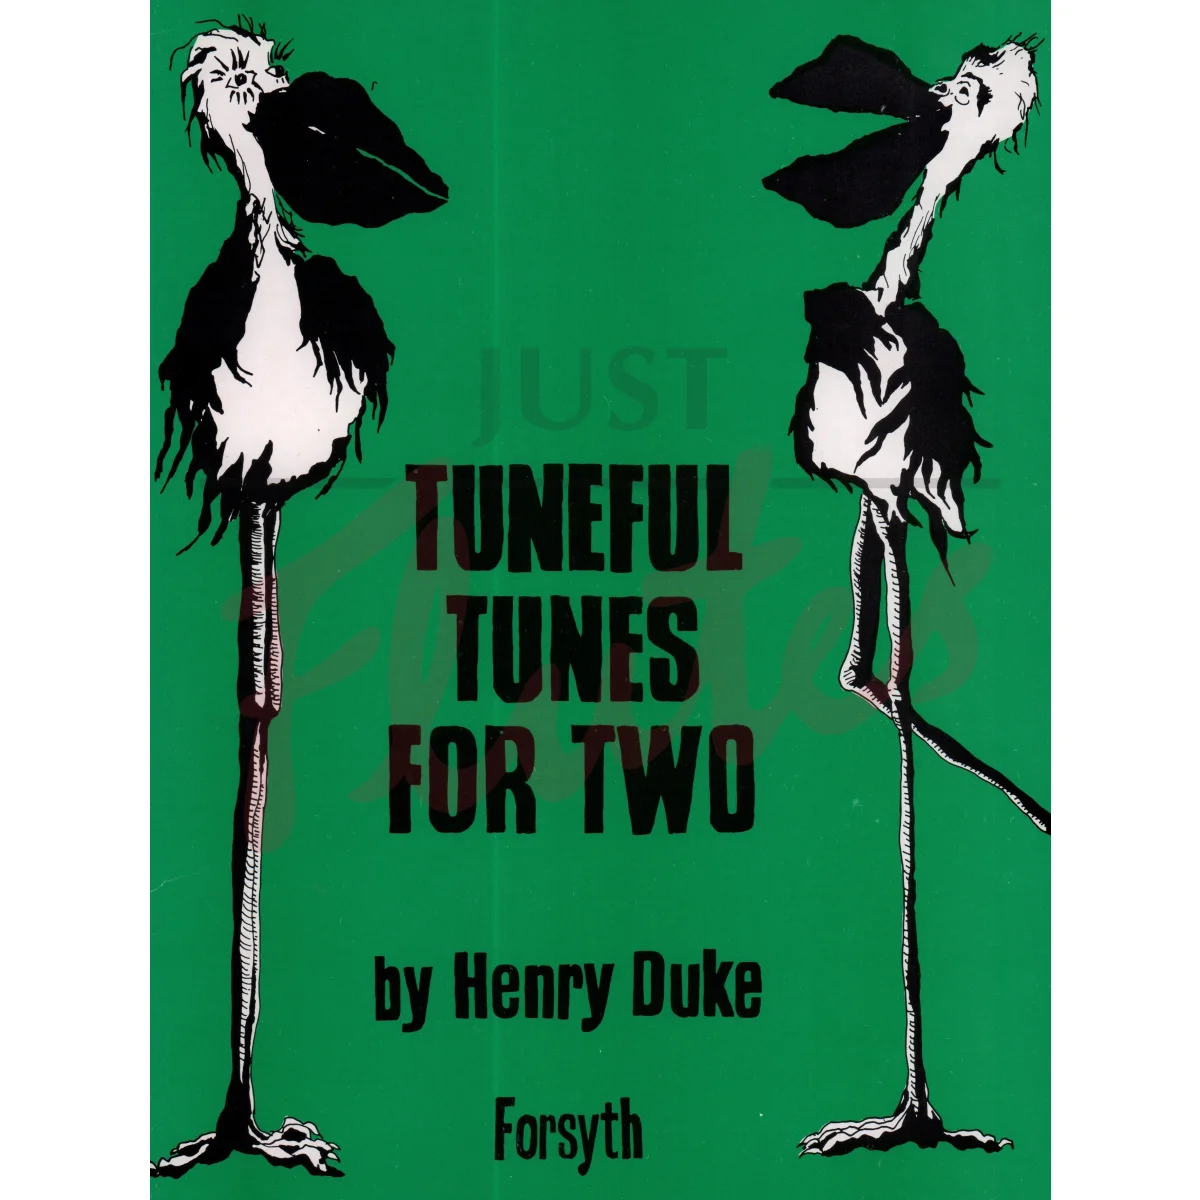 Tuneful Tunes For Two for Piano